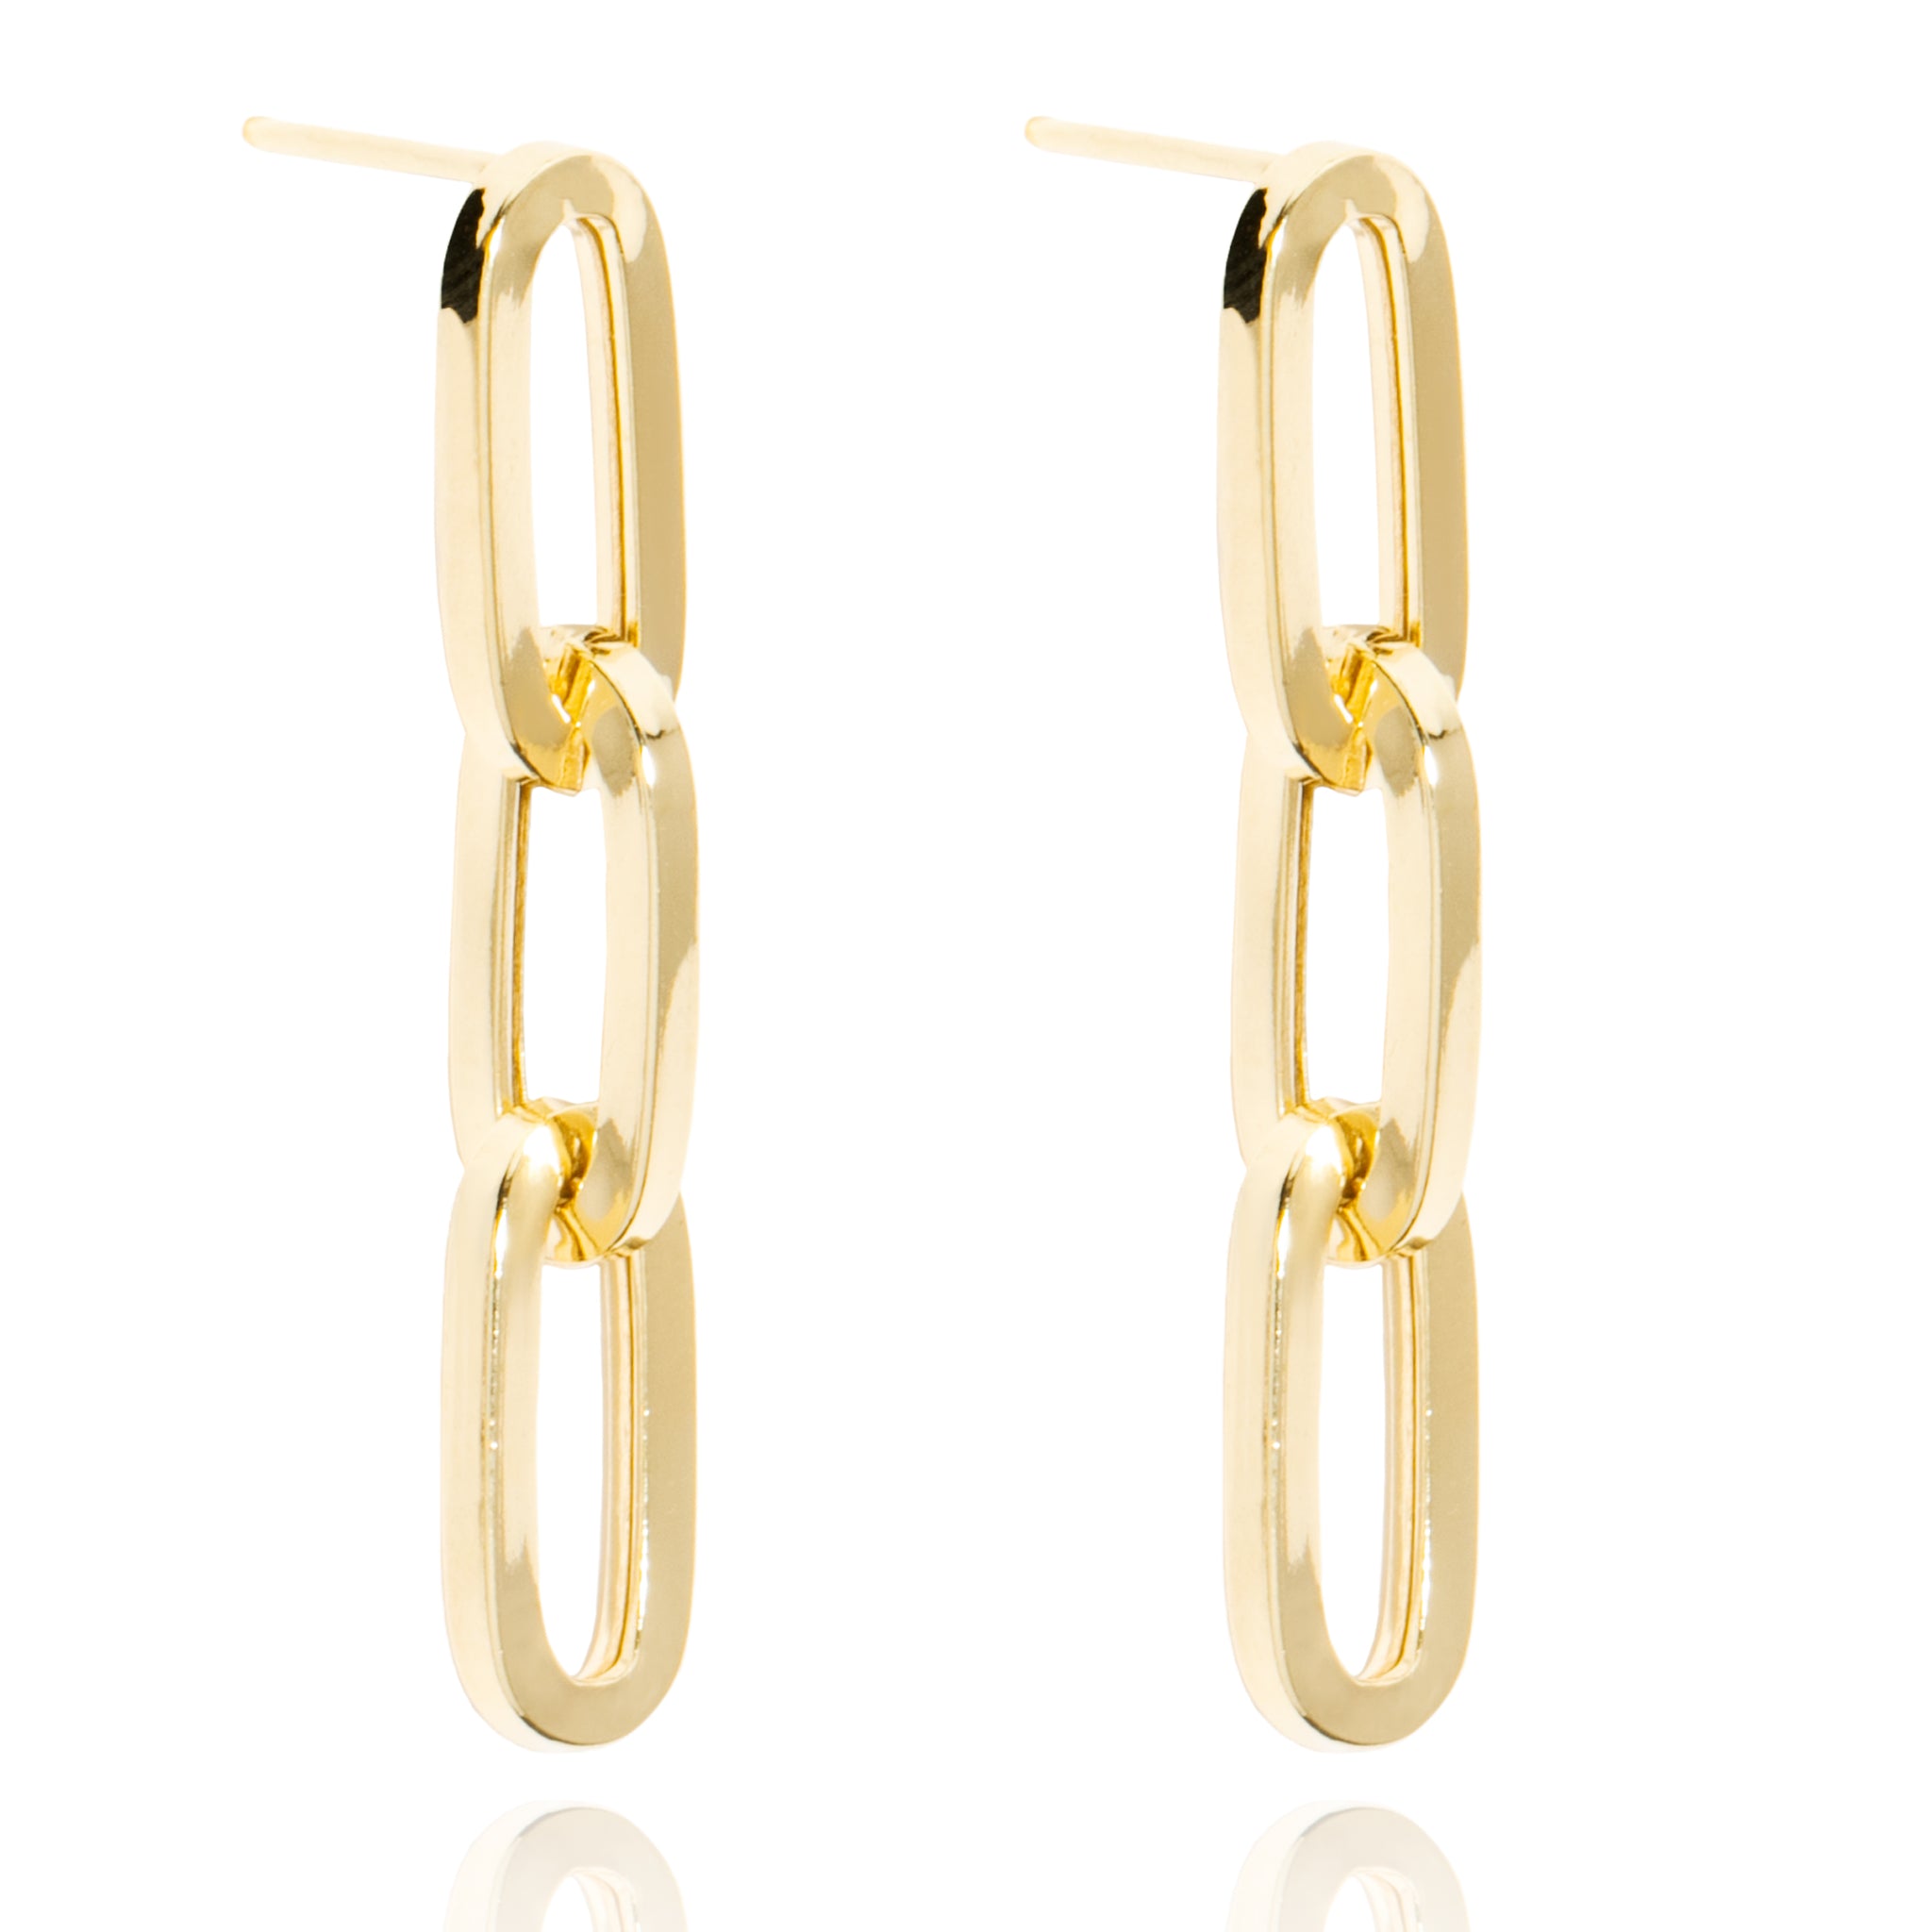 VELINA 925 Gold Plated Double Link Earrings